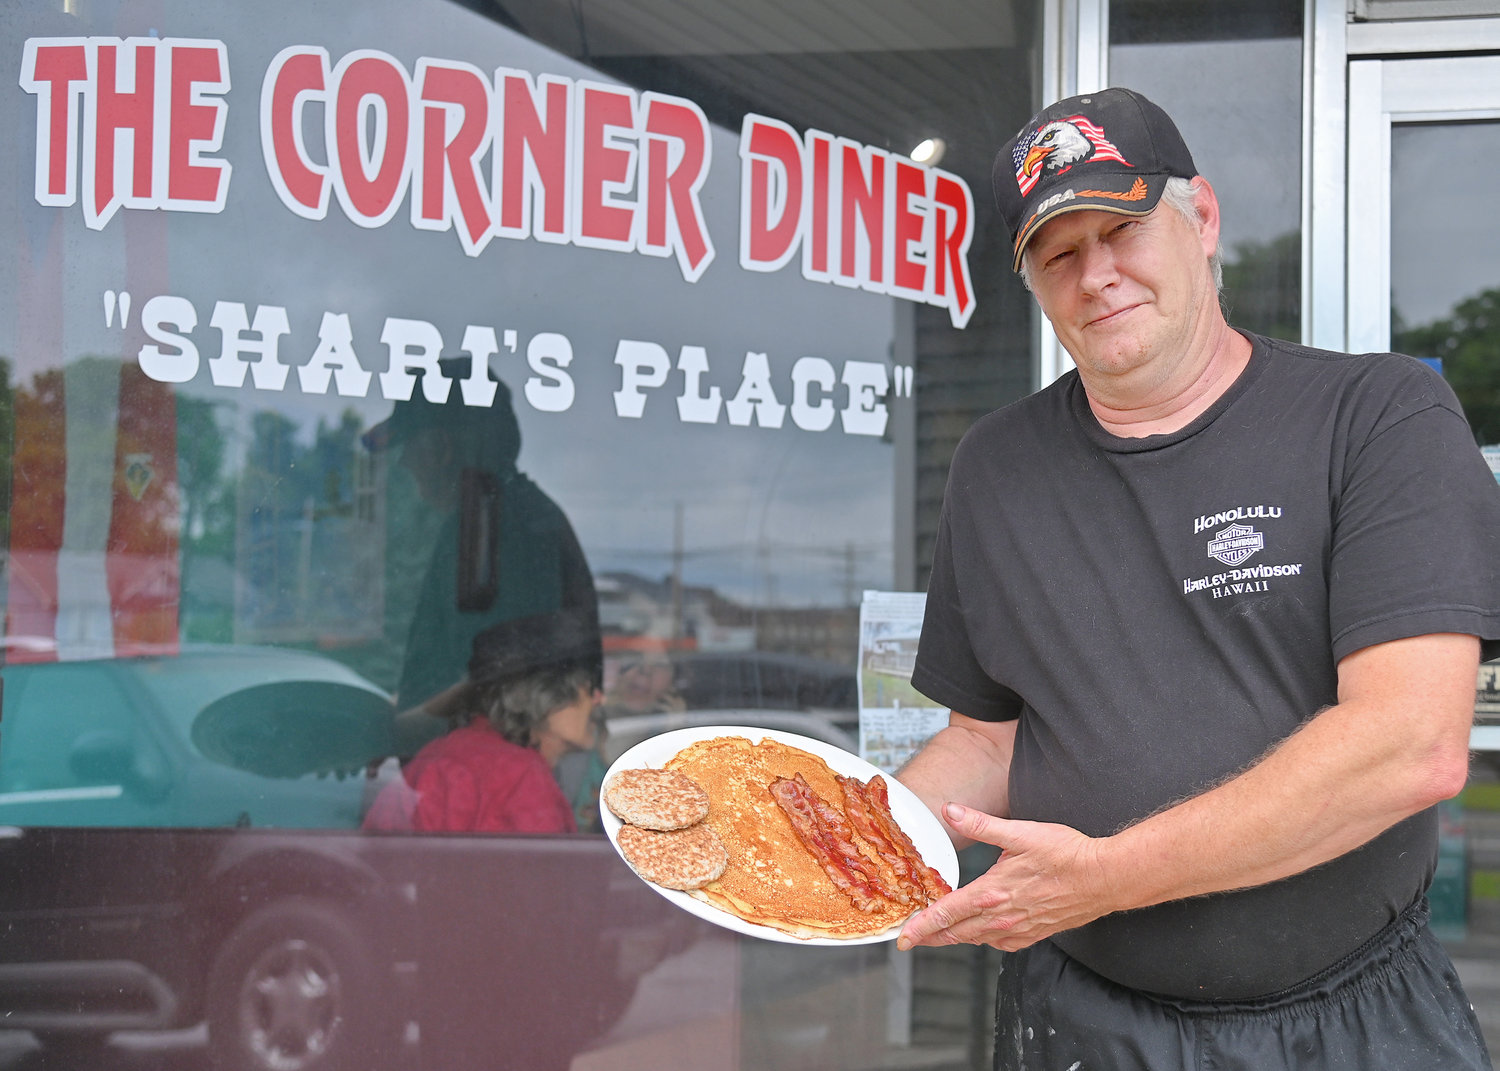 The Corner Diner owner Jon LaBuz with one of his signature breakfast items “The Hubcap” pancake.